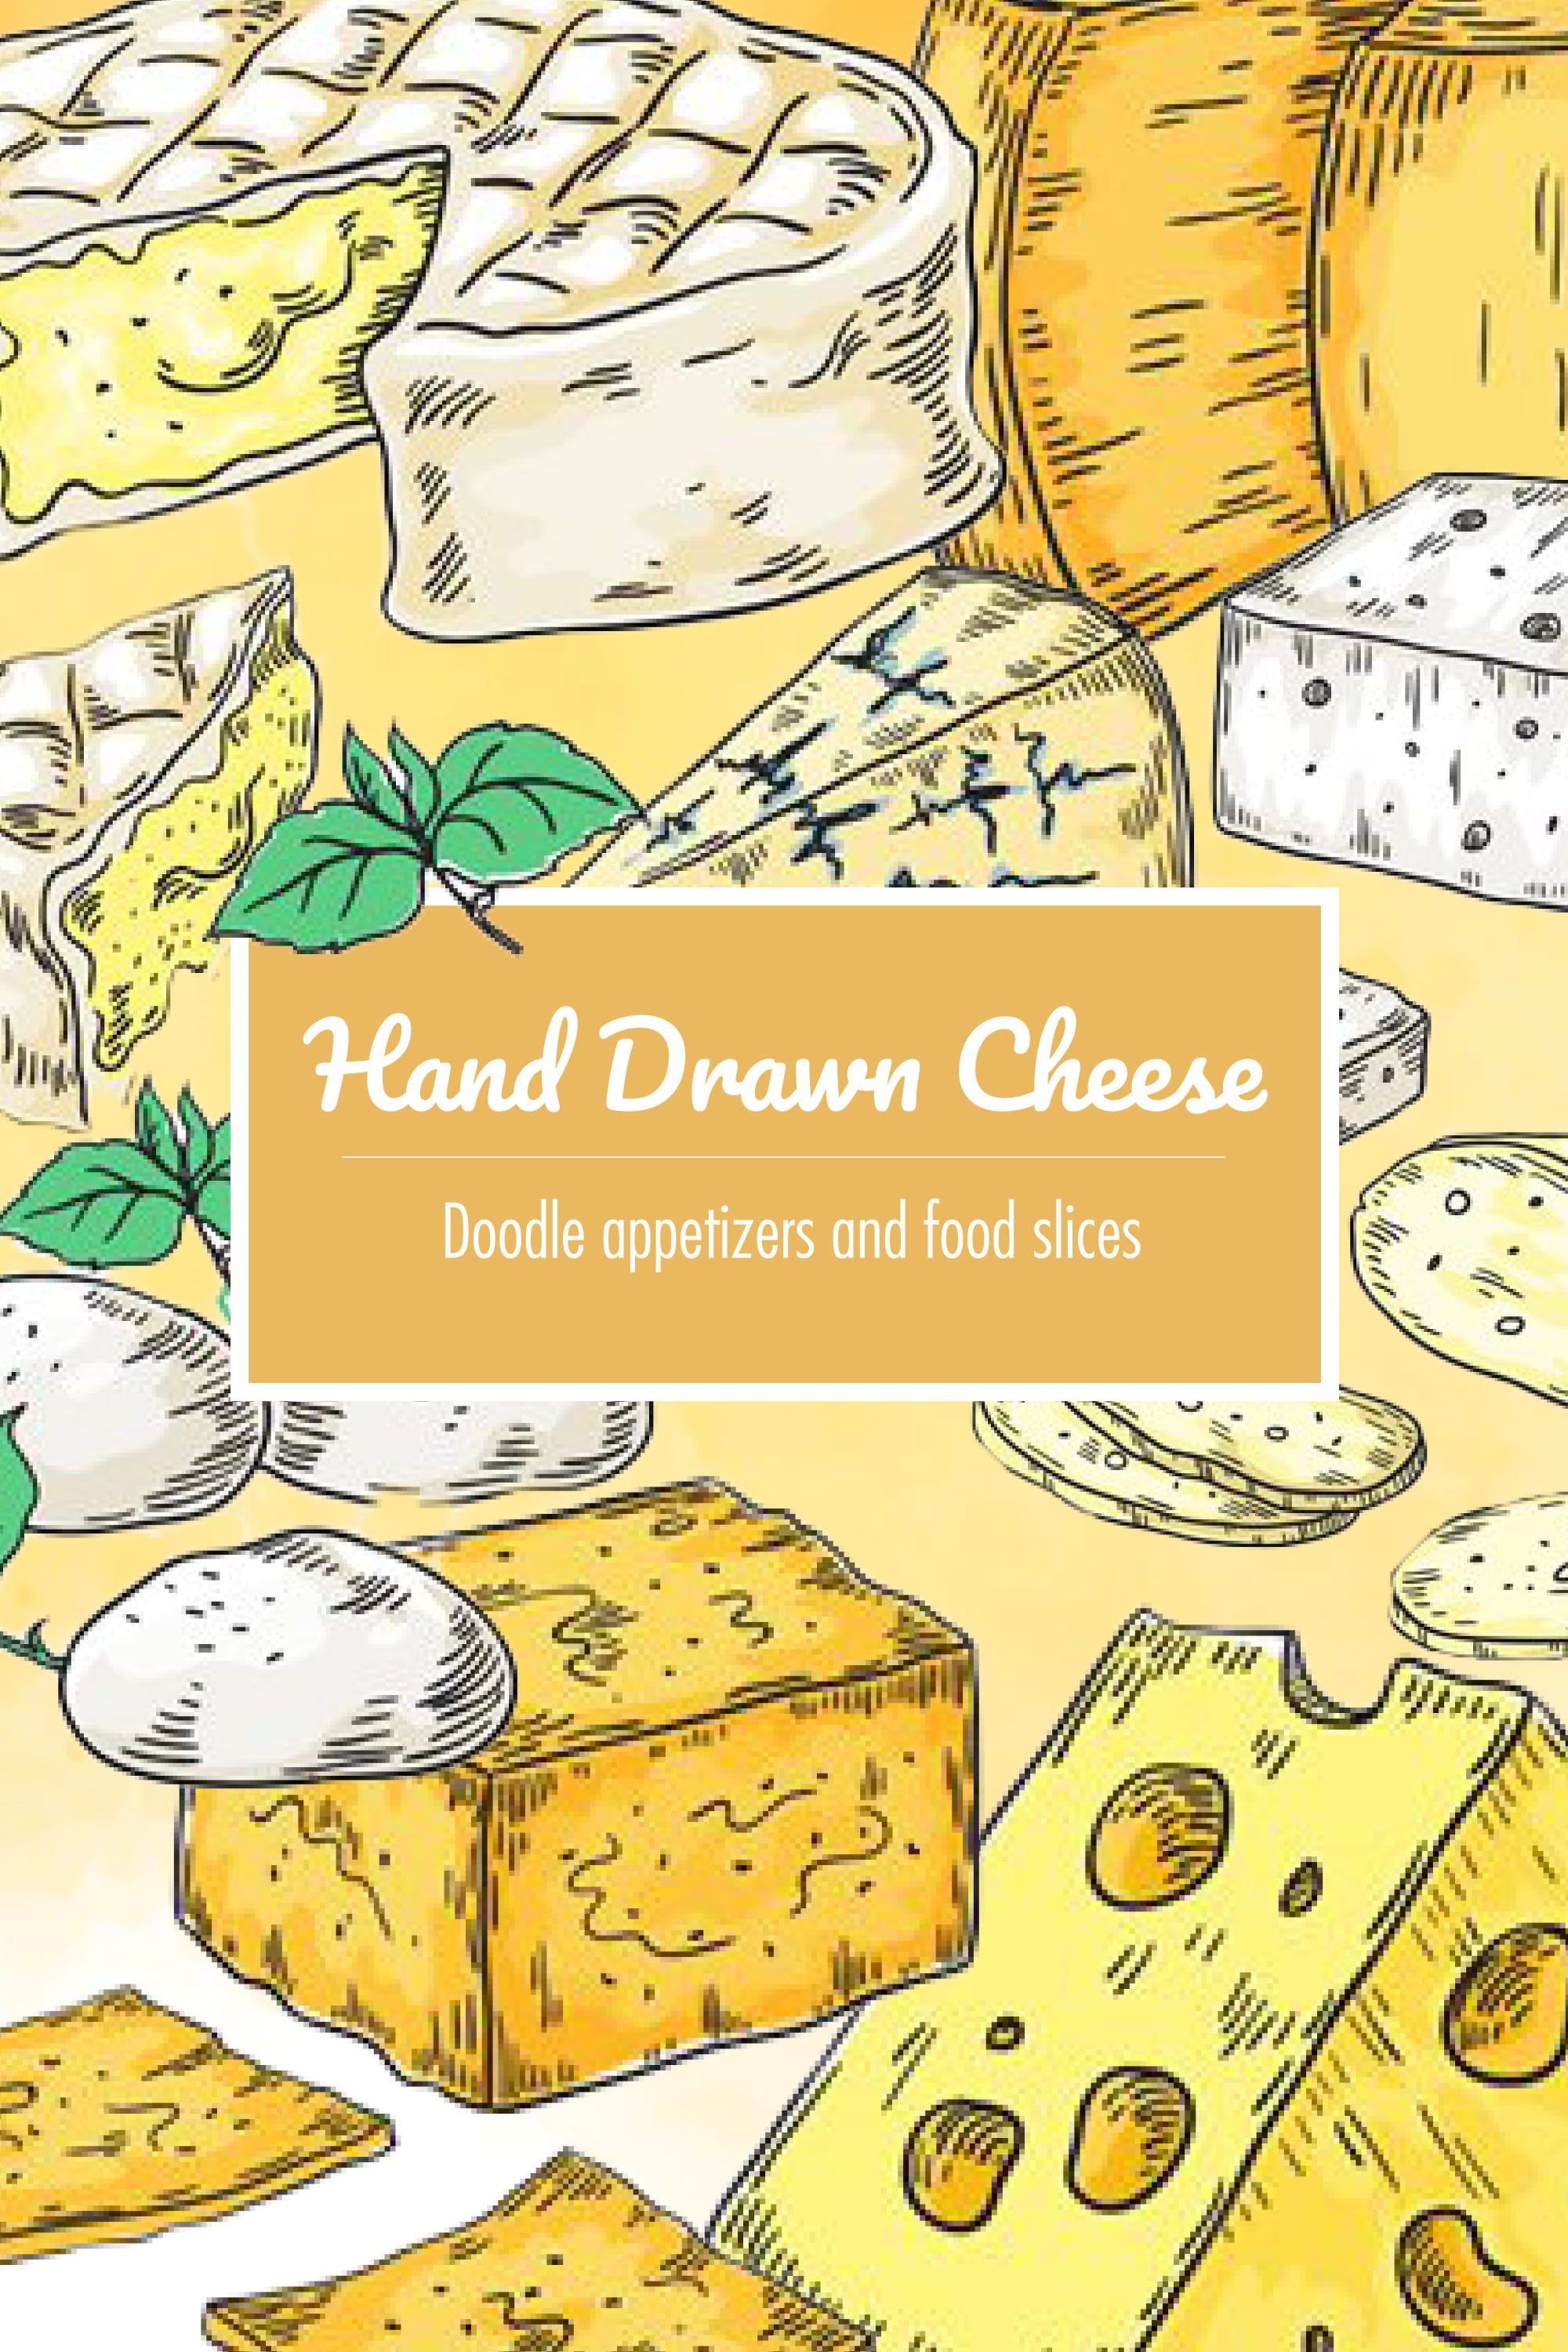 A set of gorgeous images of hard cheese on a colorful background.